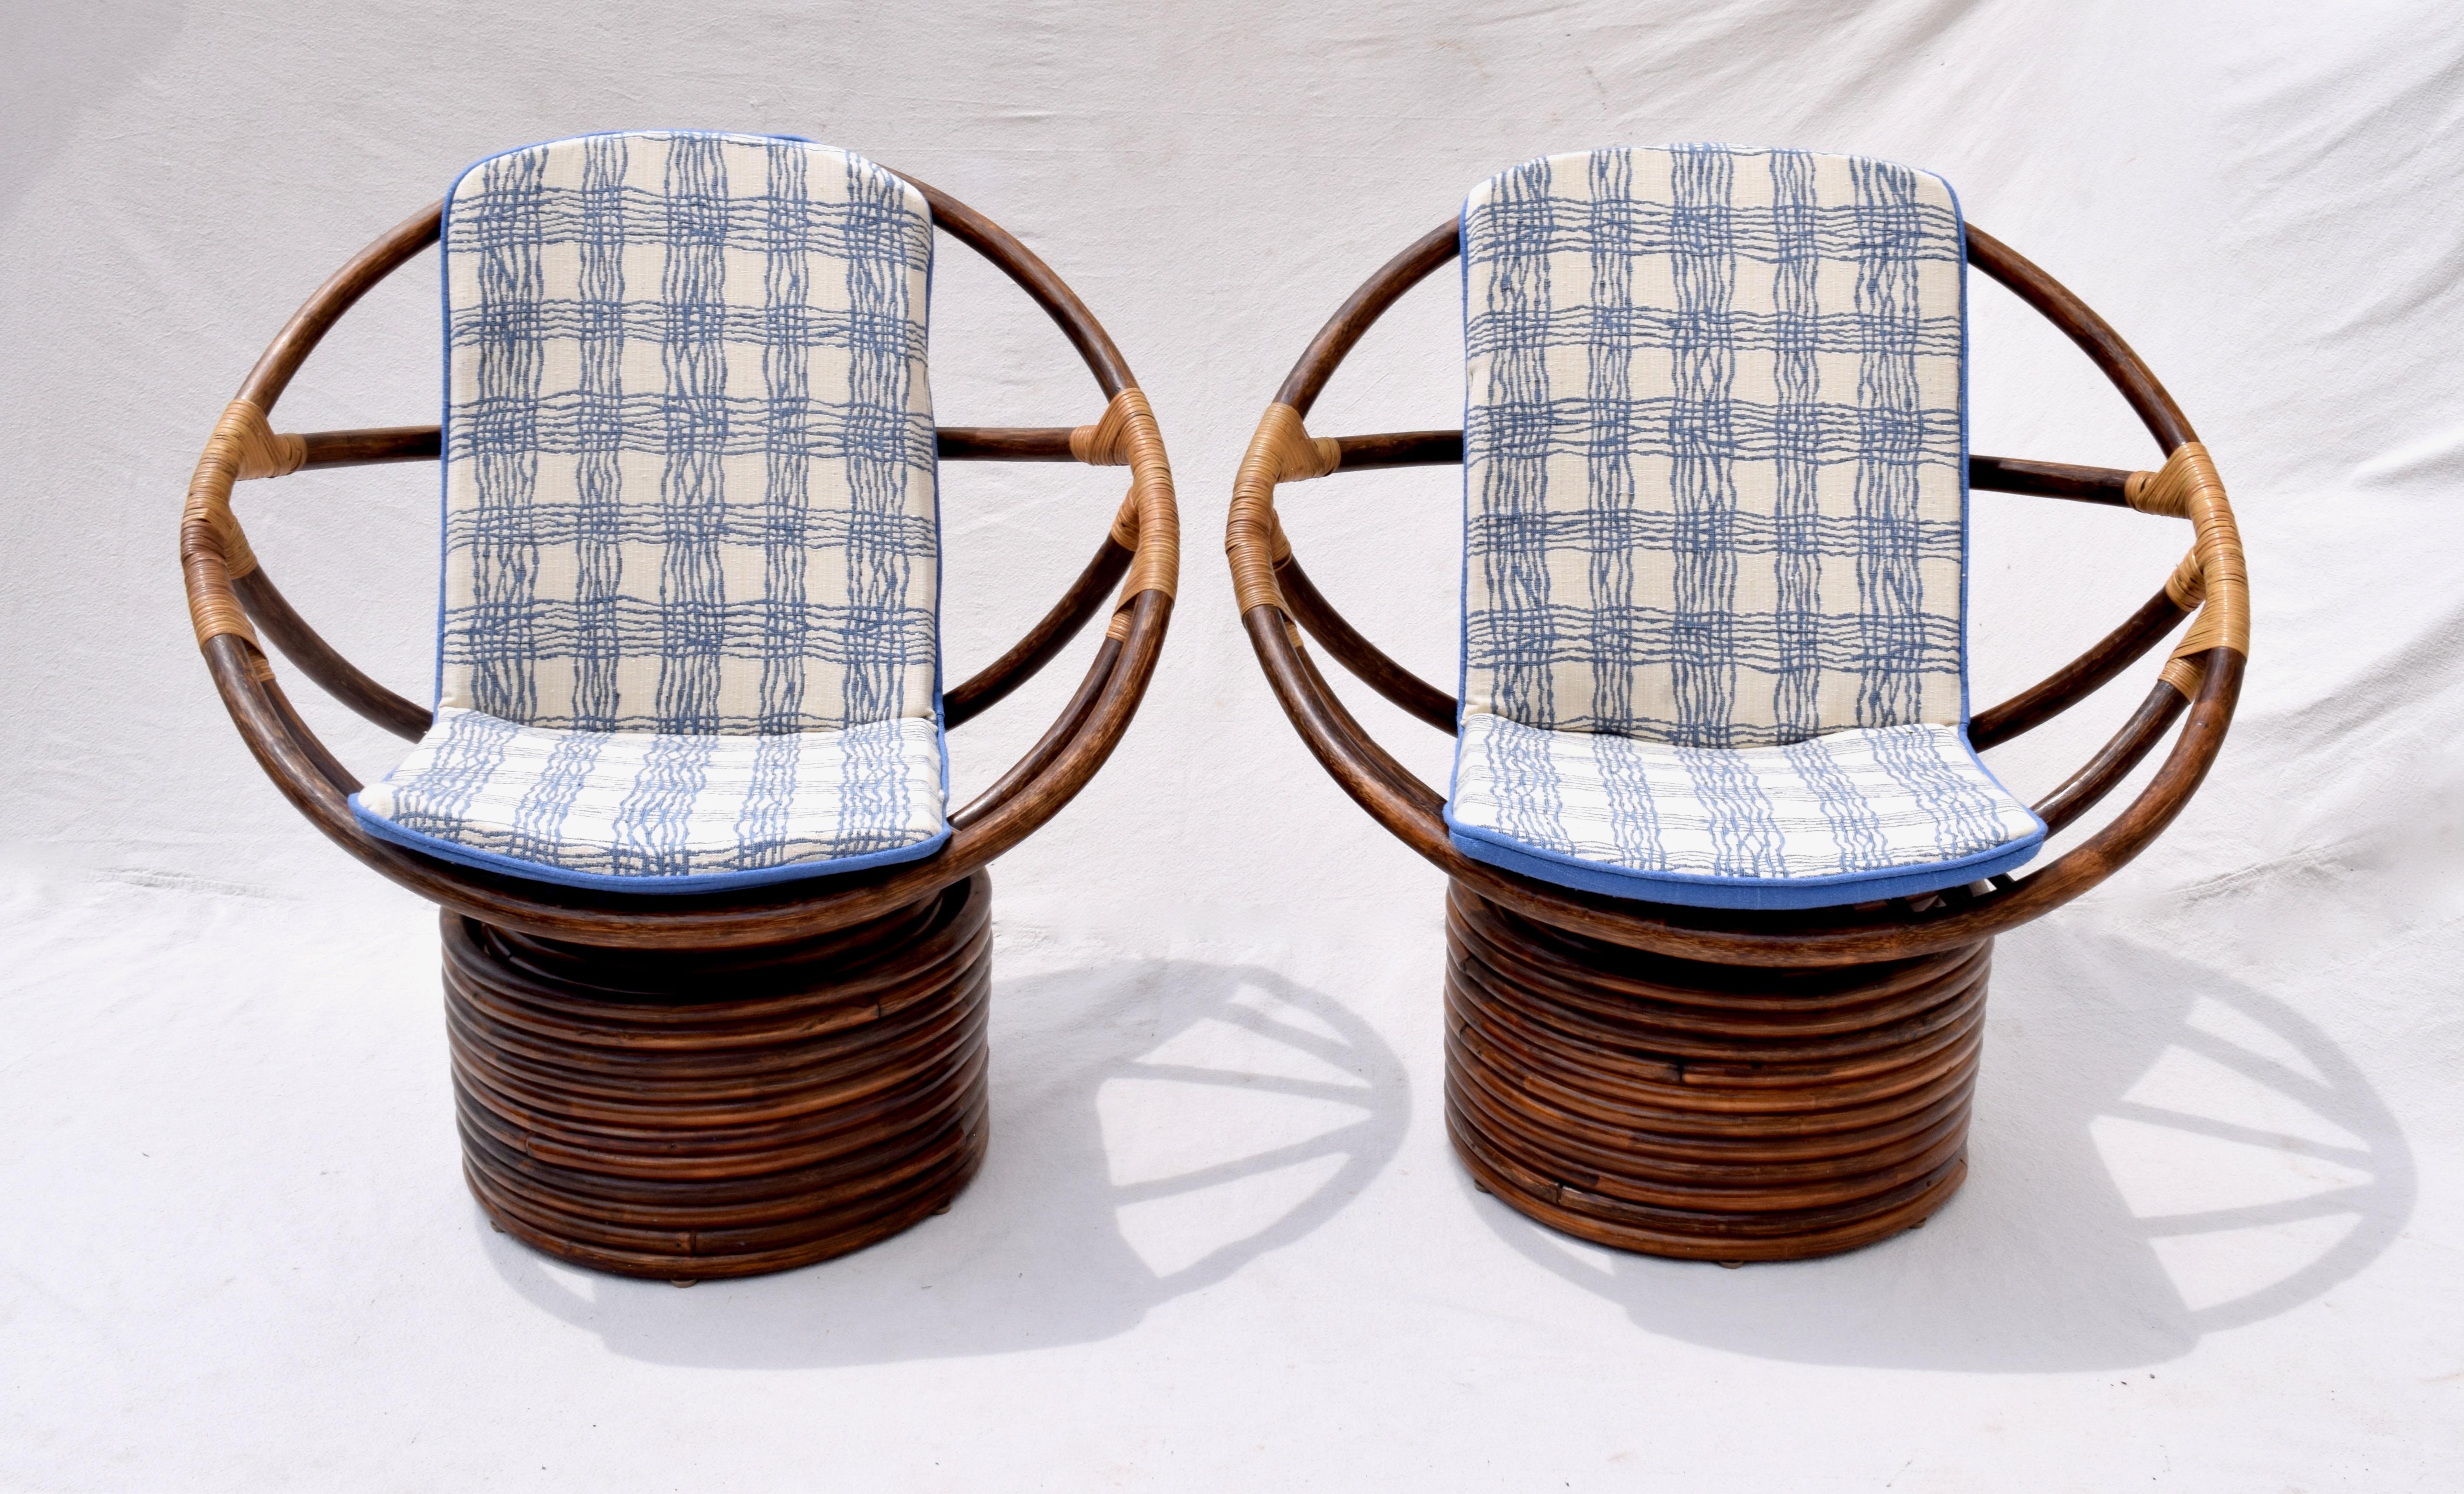 Large scale John Wisner Ficks Reed Far Horizons swivel bamboo rattan lounge chairs with new custom cushions upholstered in thickly woven Brunschwig & Fils cotton linen. Additional smaller scale matching chairs can be seen in our separate listing: